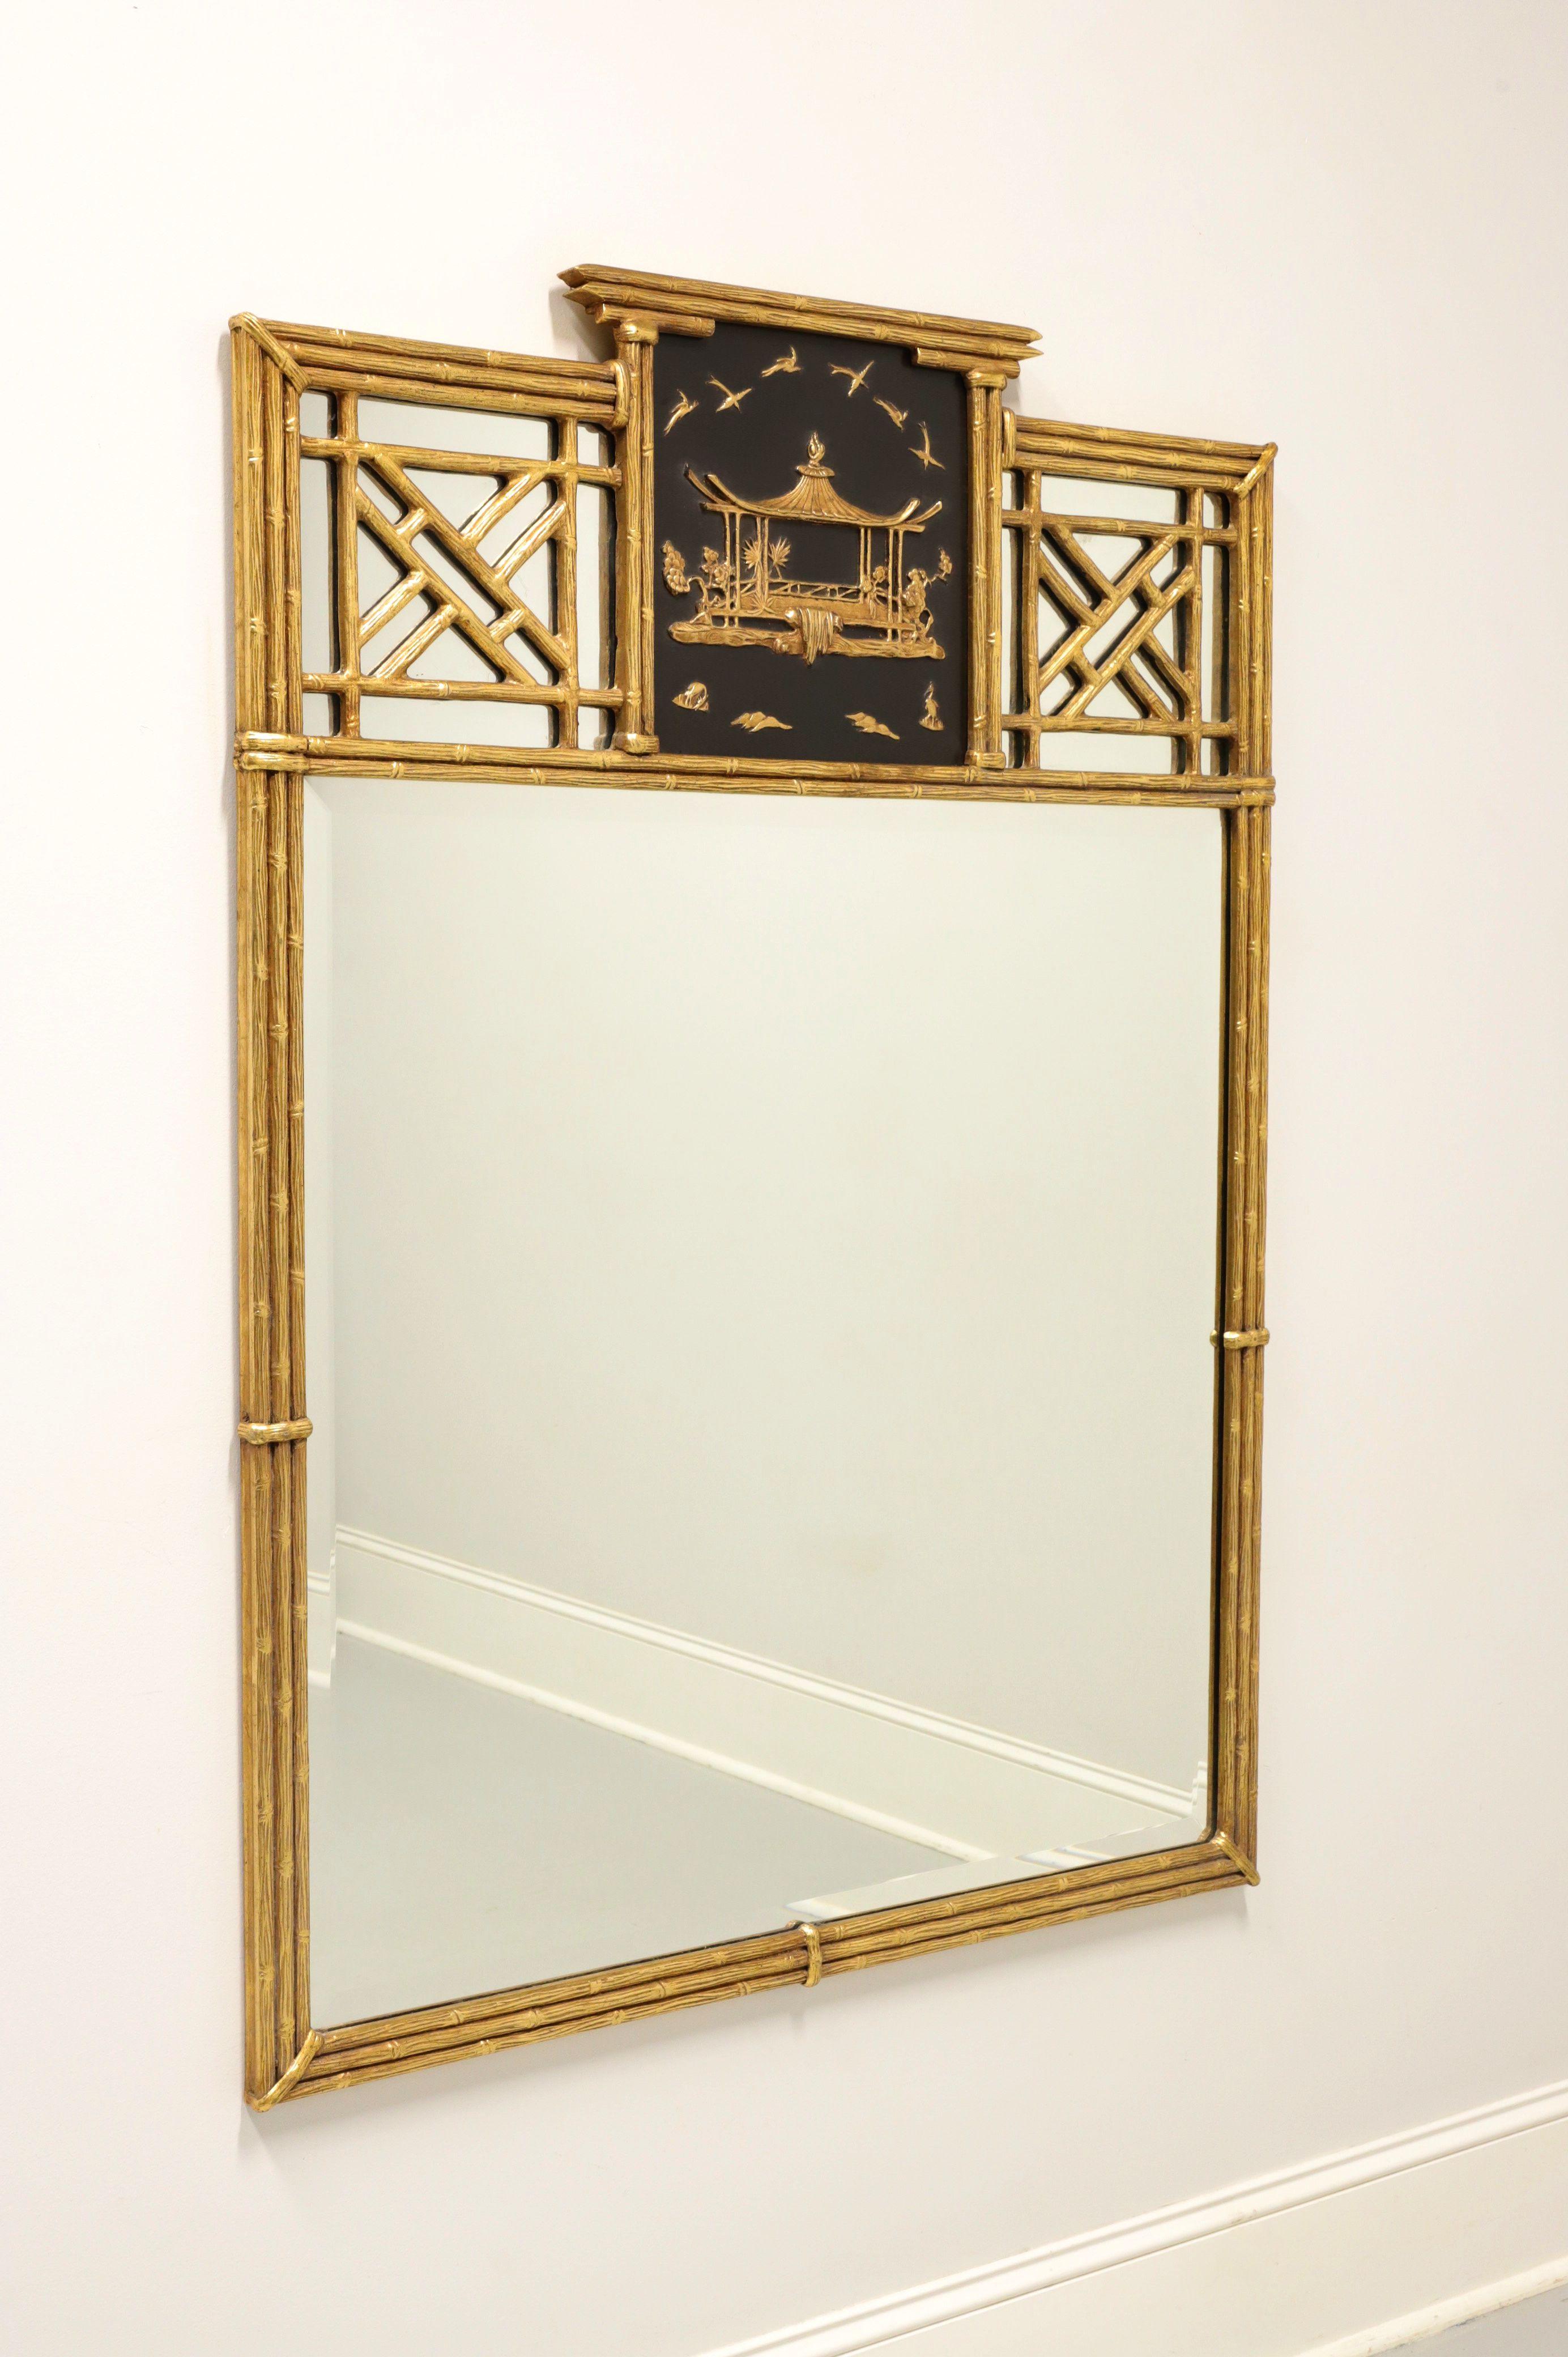 FRIEDMAN BROTHERS Gold Gilt Faux Bamboo Japanese Pagoda Mirror For Sale 6